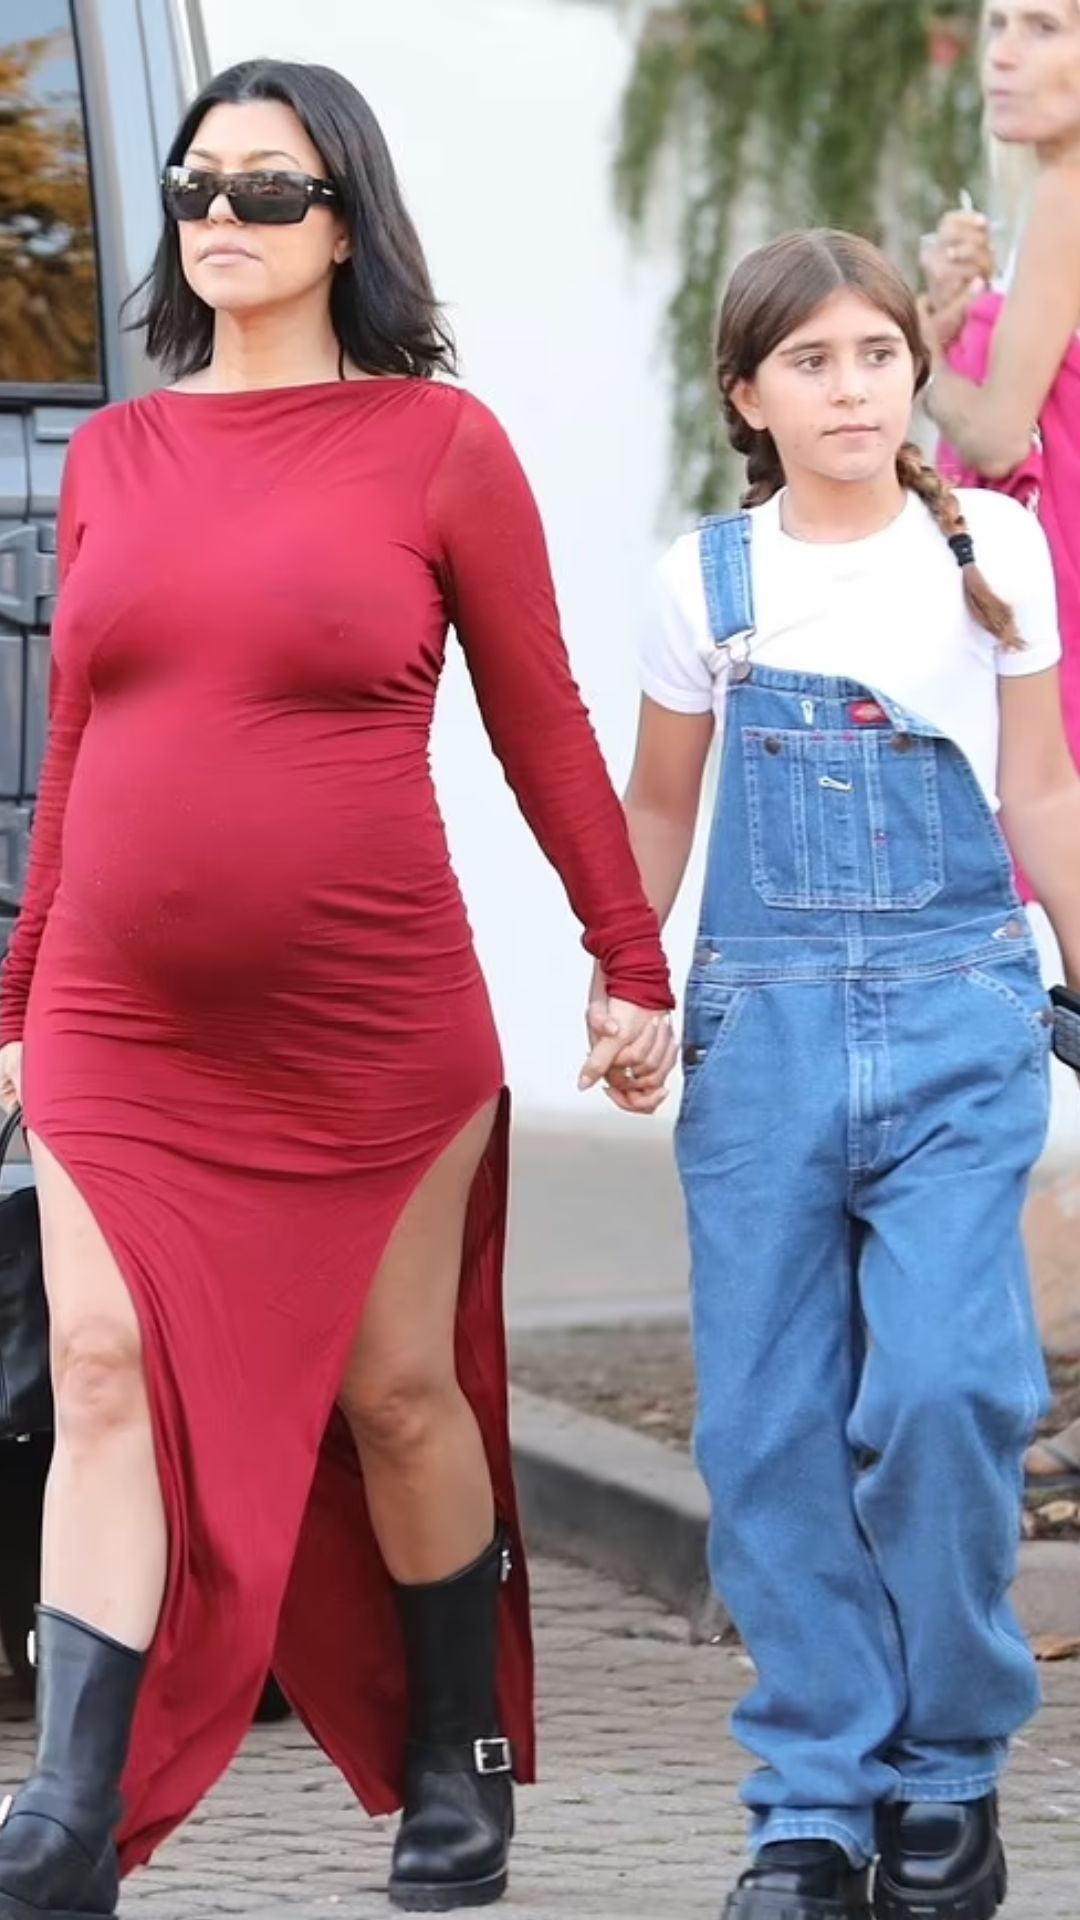 Kourtney Kardashian dons fitted red dress while out with daughter